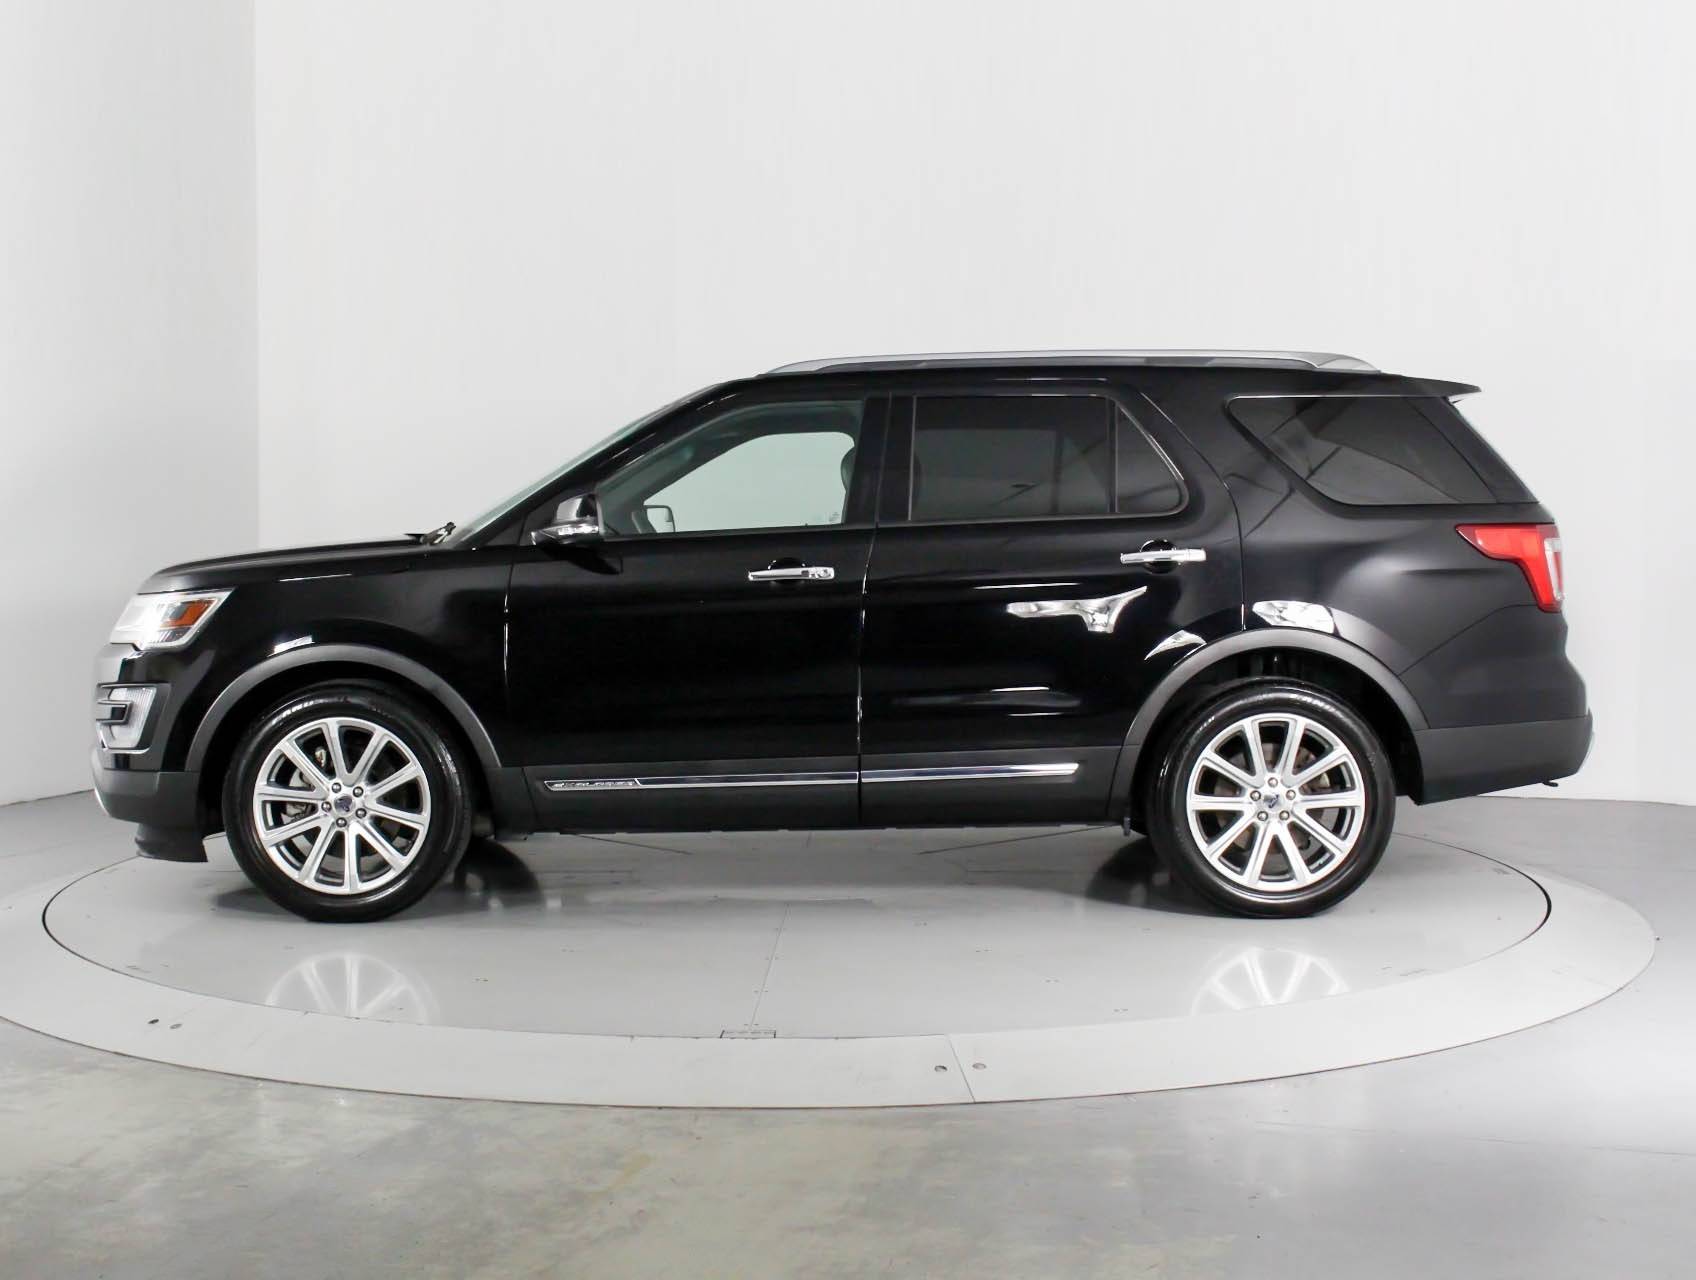 Florida Fine Cars - Used FORD EXPLORER 2016 WEST PALM LIMITED